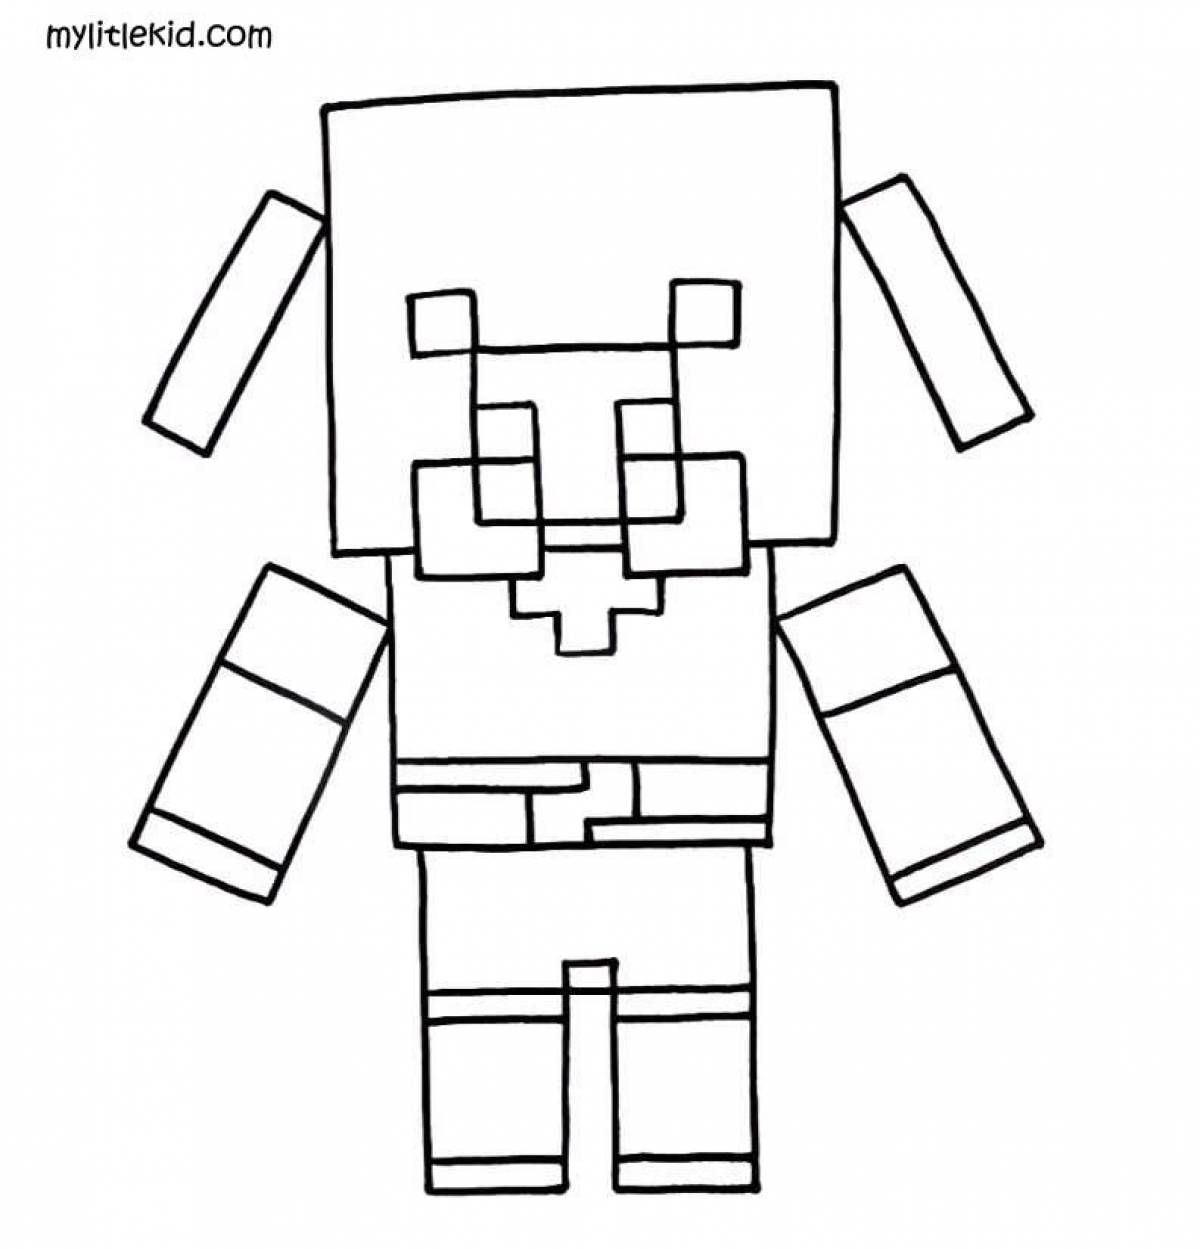 Intricate minecraft zombie coloring page